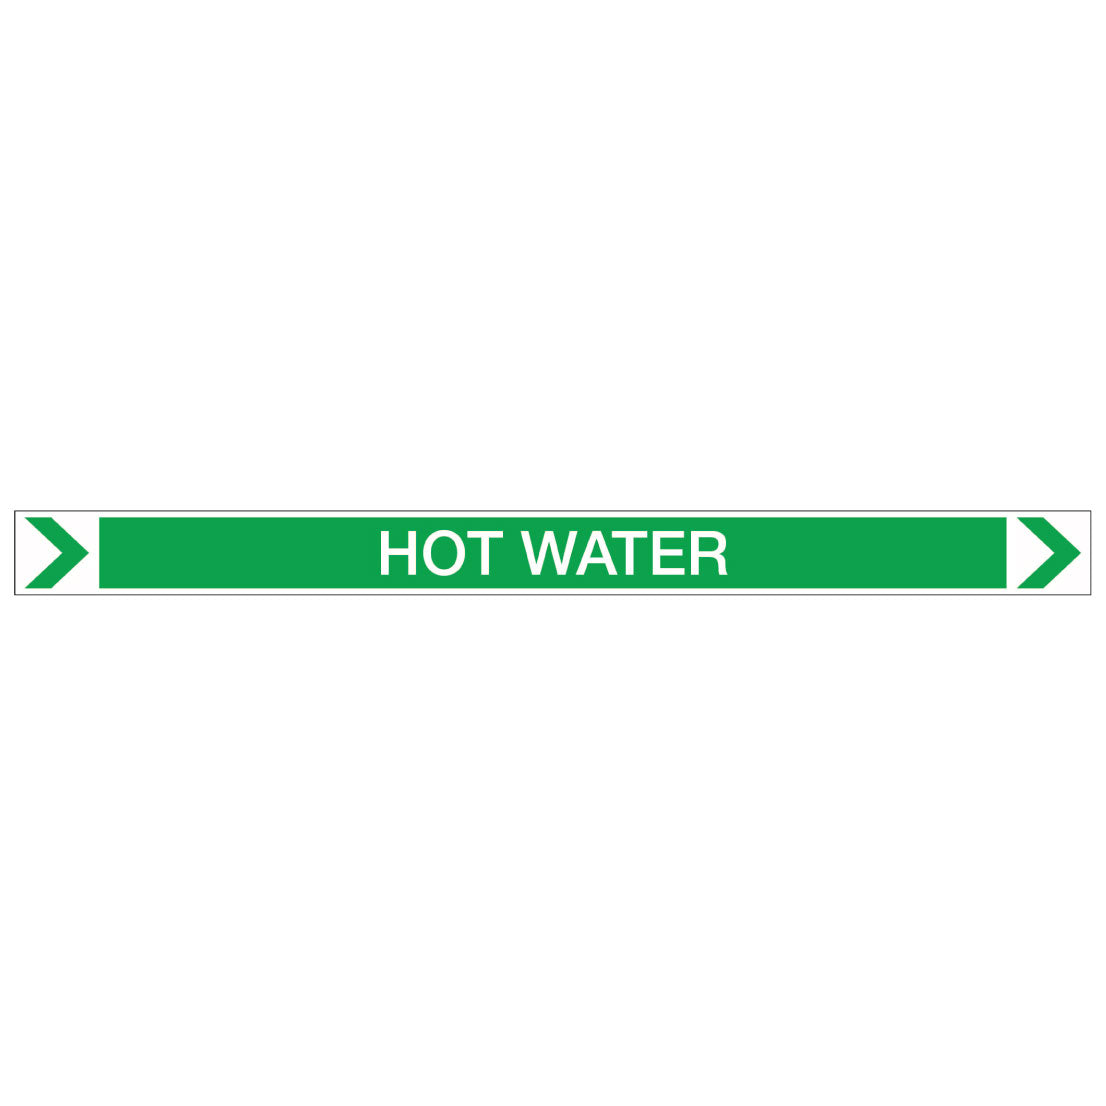 Pool/Spa - Hot Water (Right) - Pipe Marker Sticker